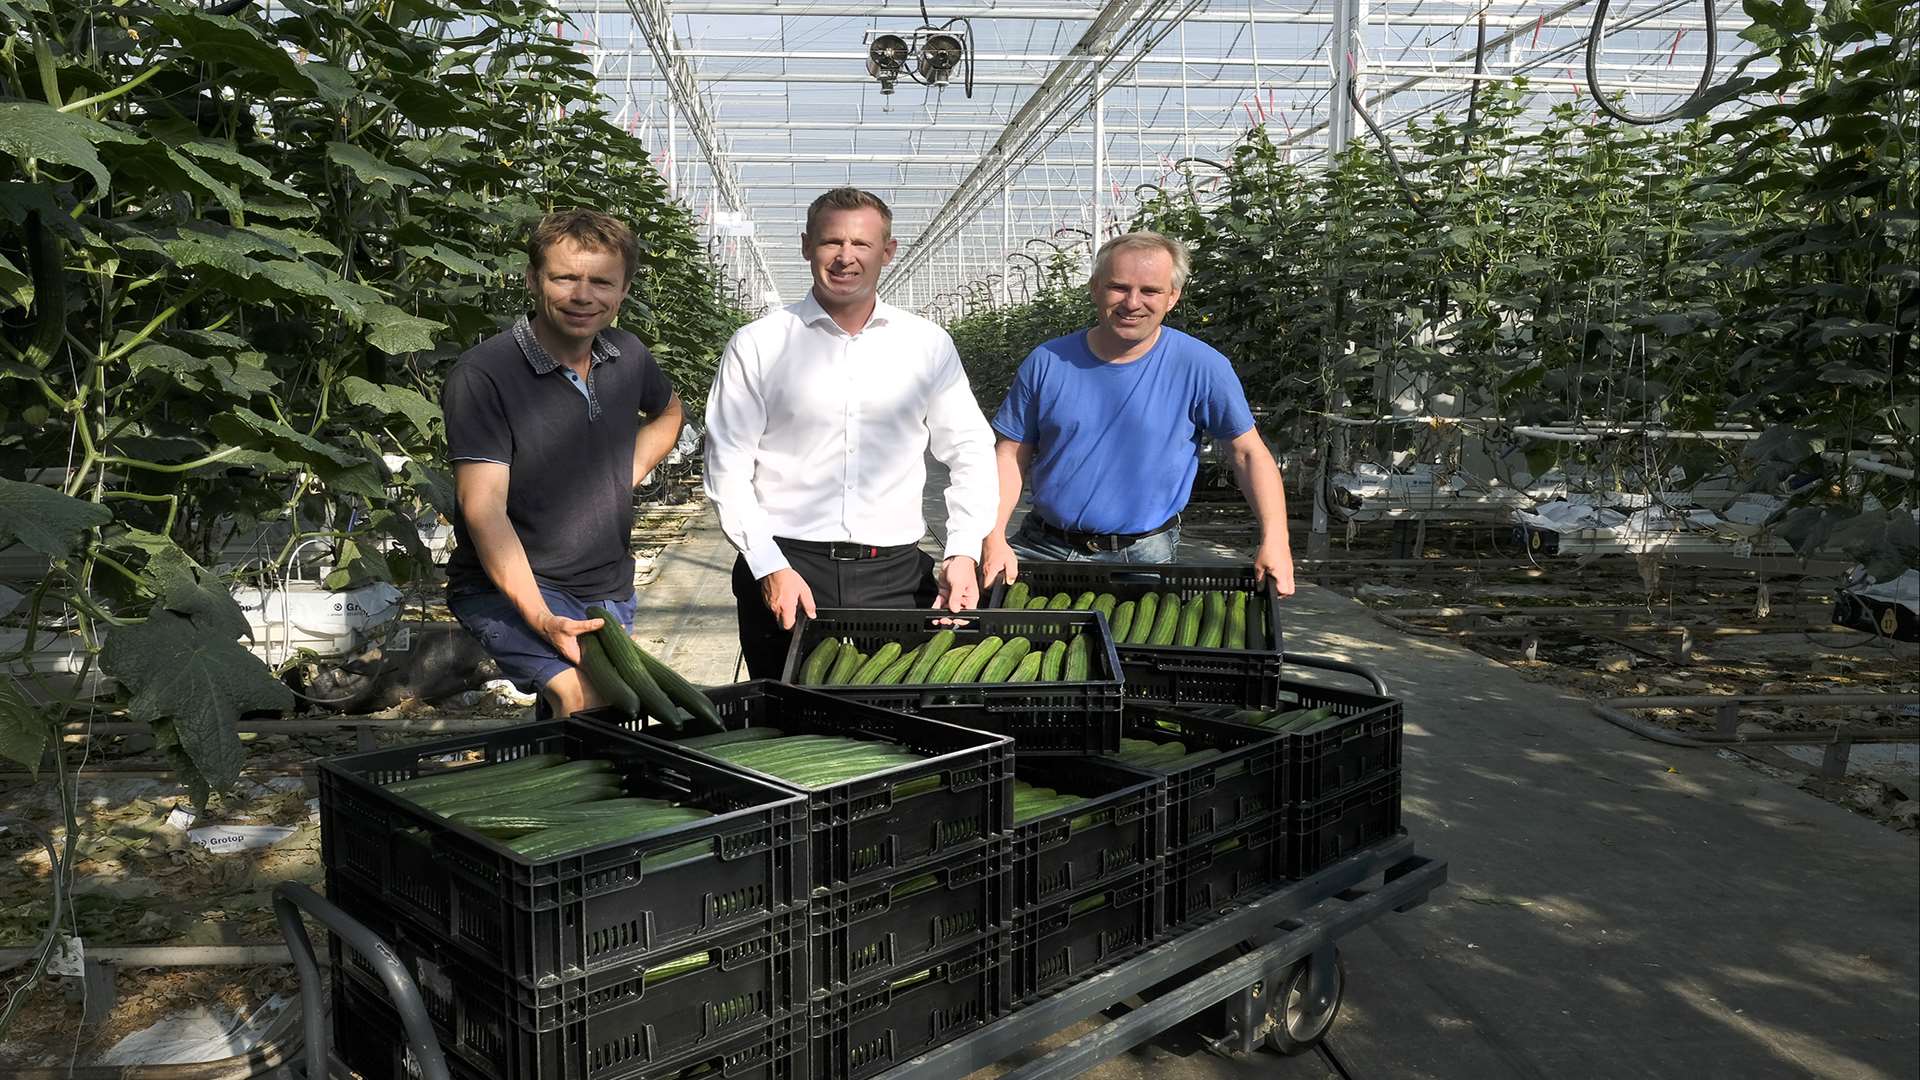 Wayne Hodgson, centre, with Directors and cucumber growers Arjan de Gier, left, Addy Breugem from Thanet Earth